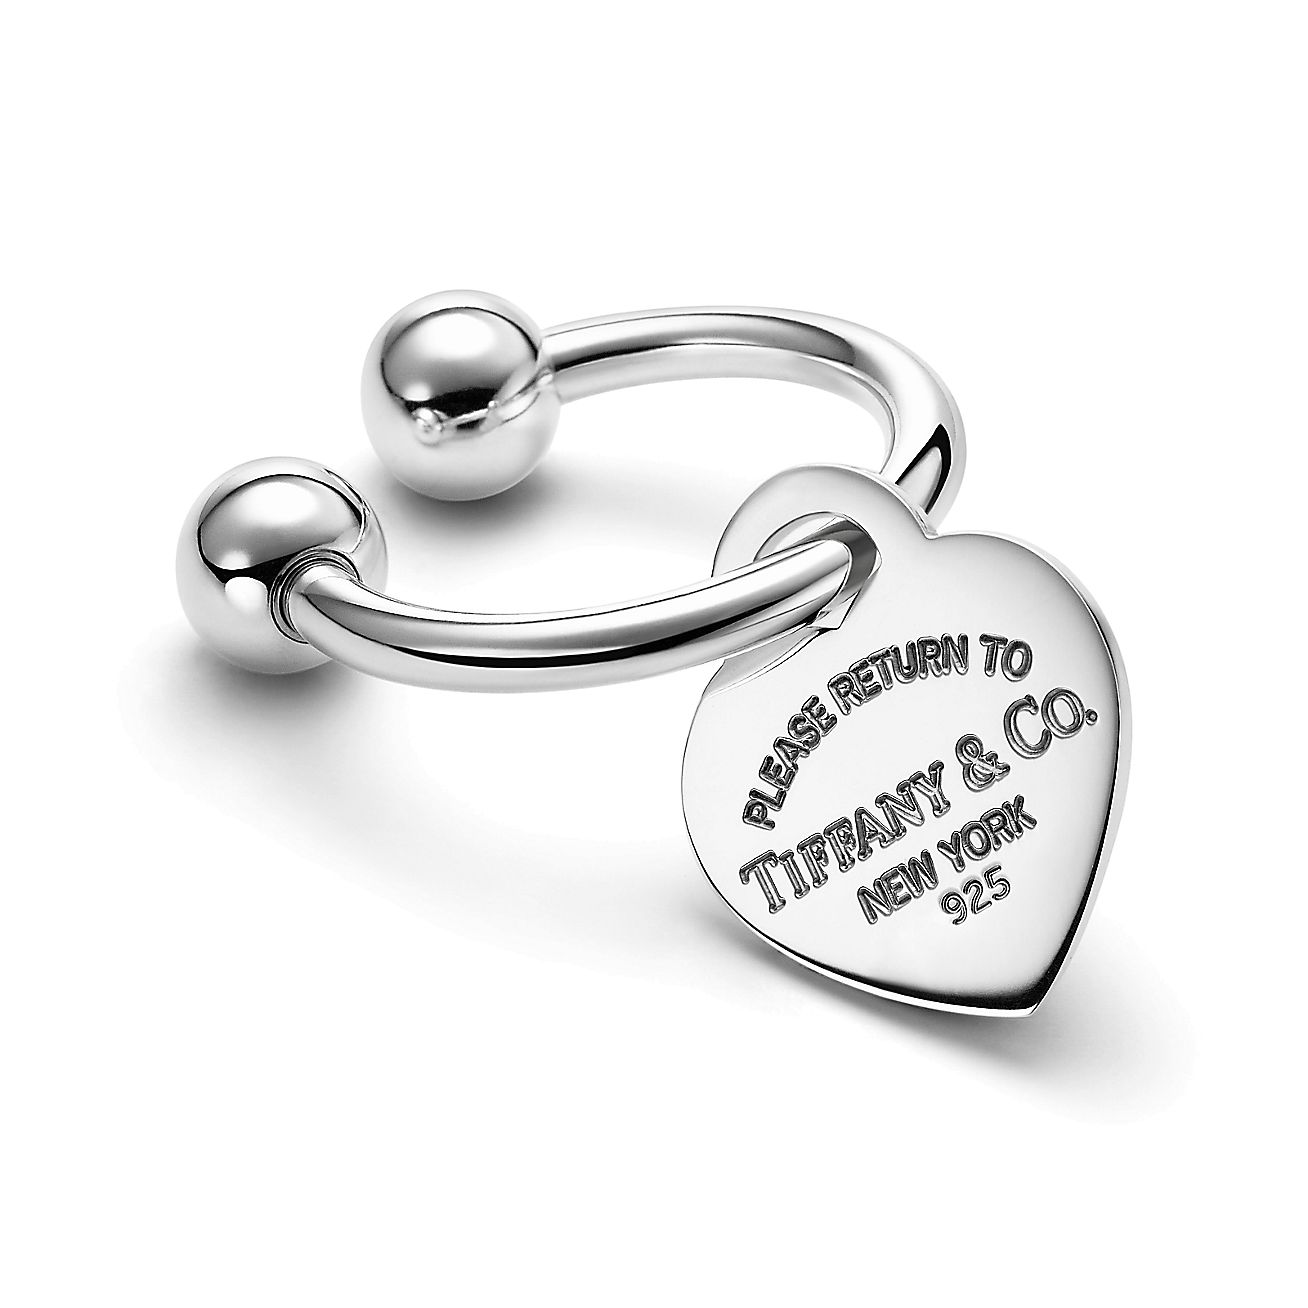 The Heart's Key Ring in Sterling Silver